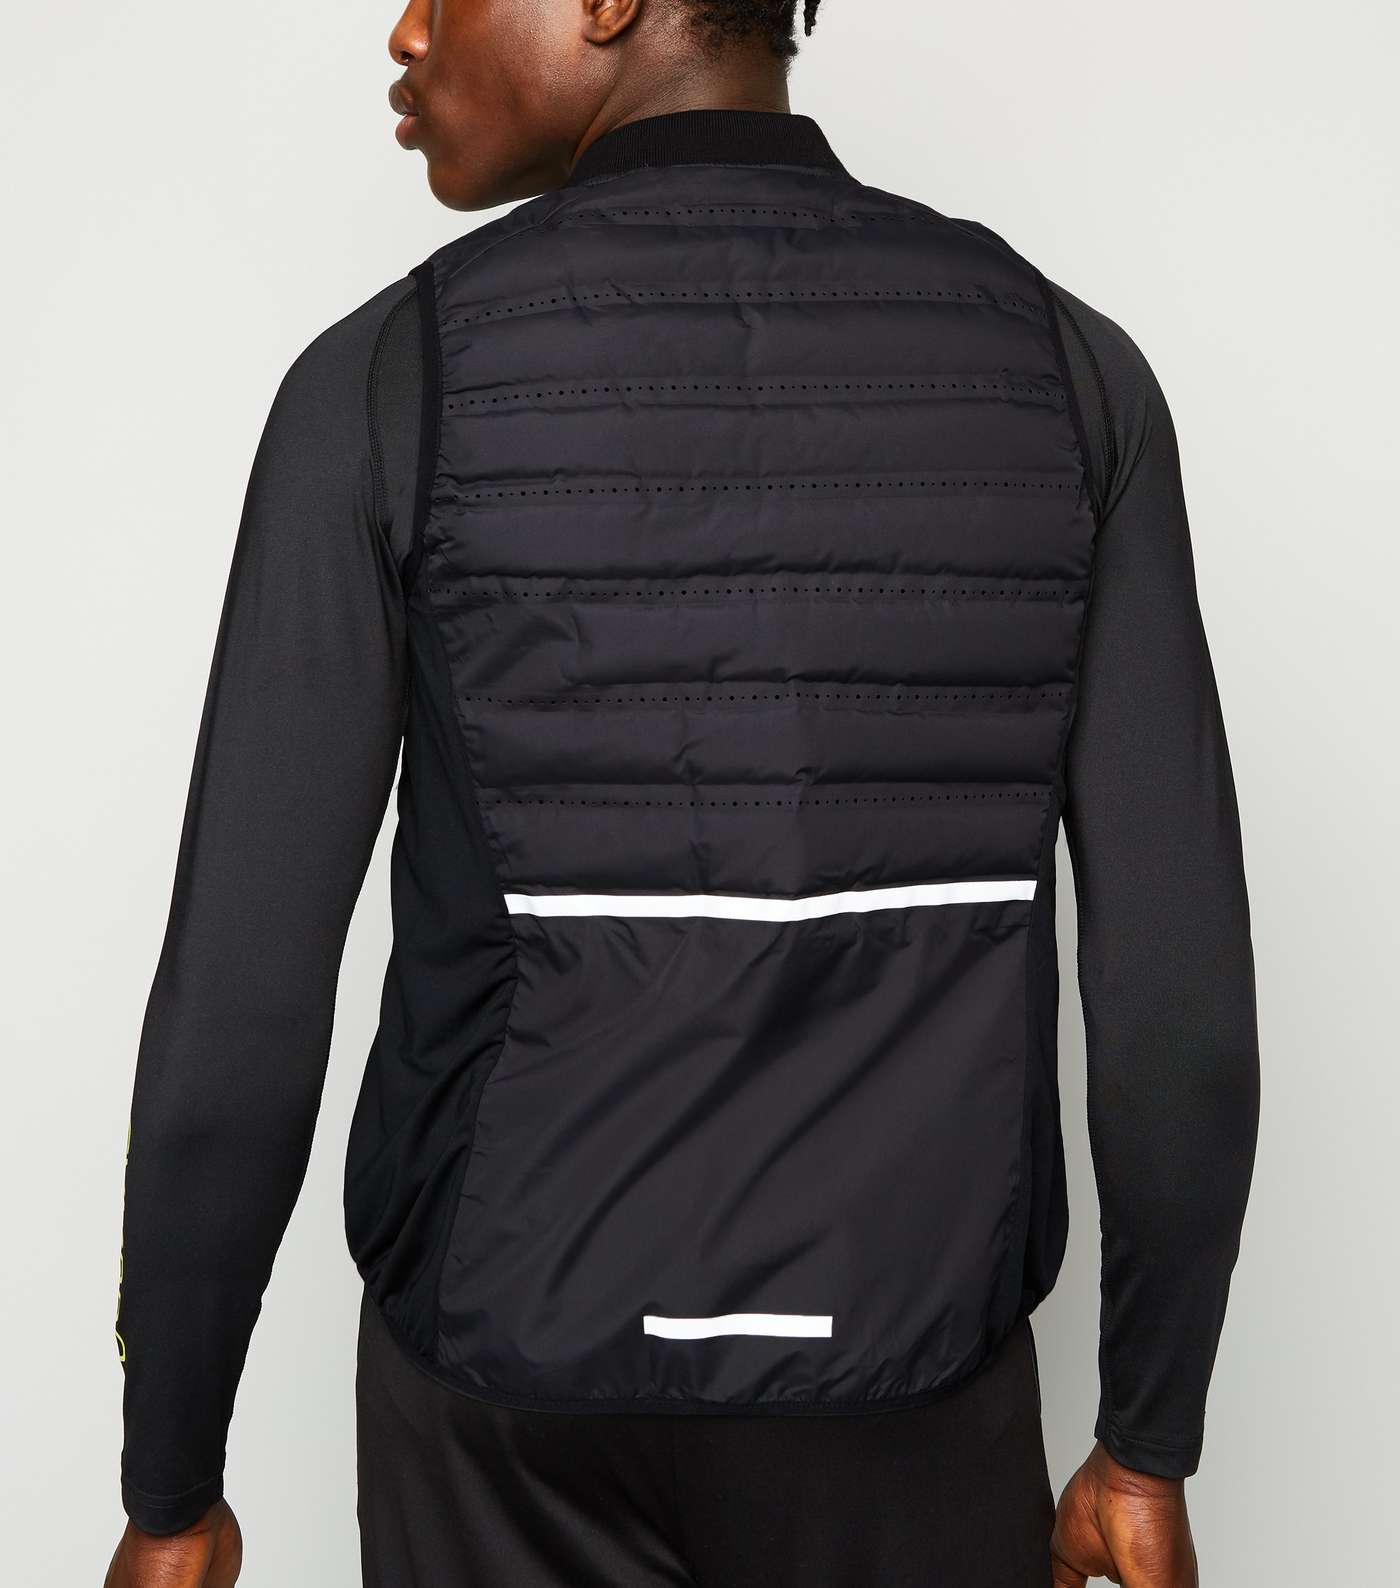 GymPro Black Quilted Sports Gilet Image 3